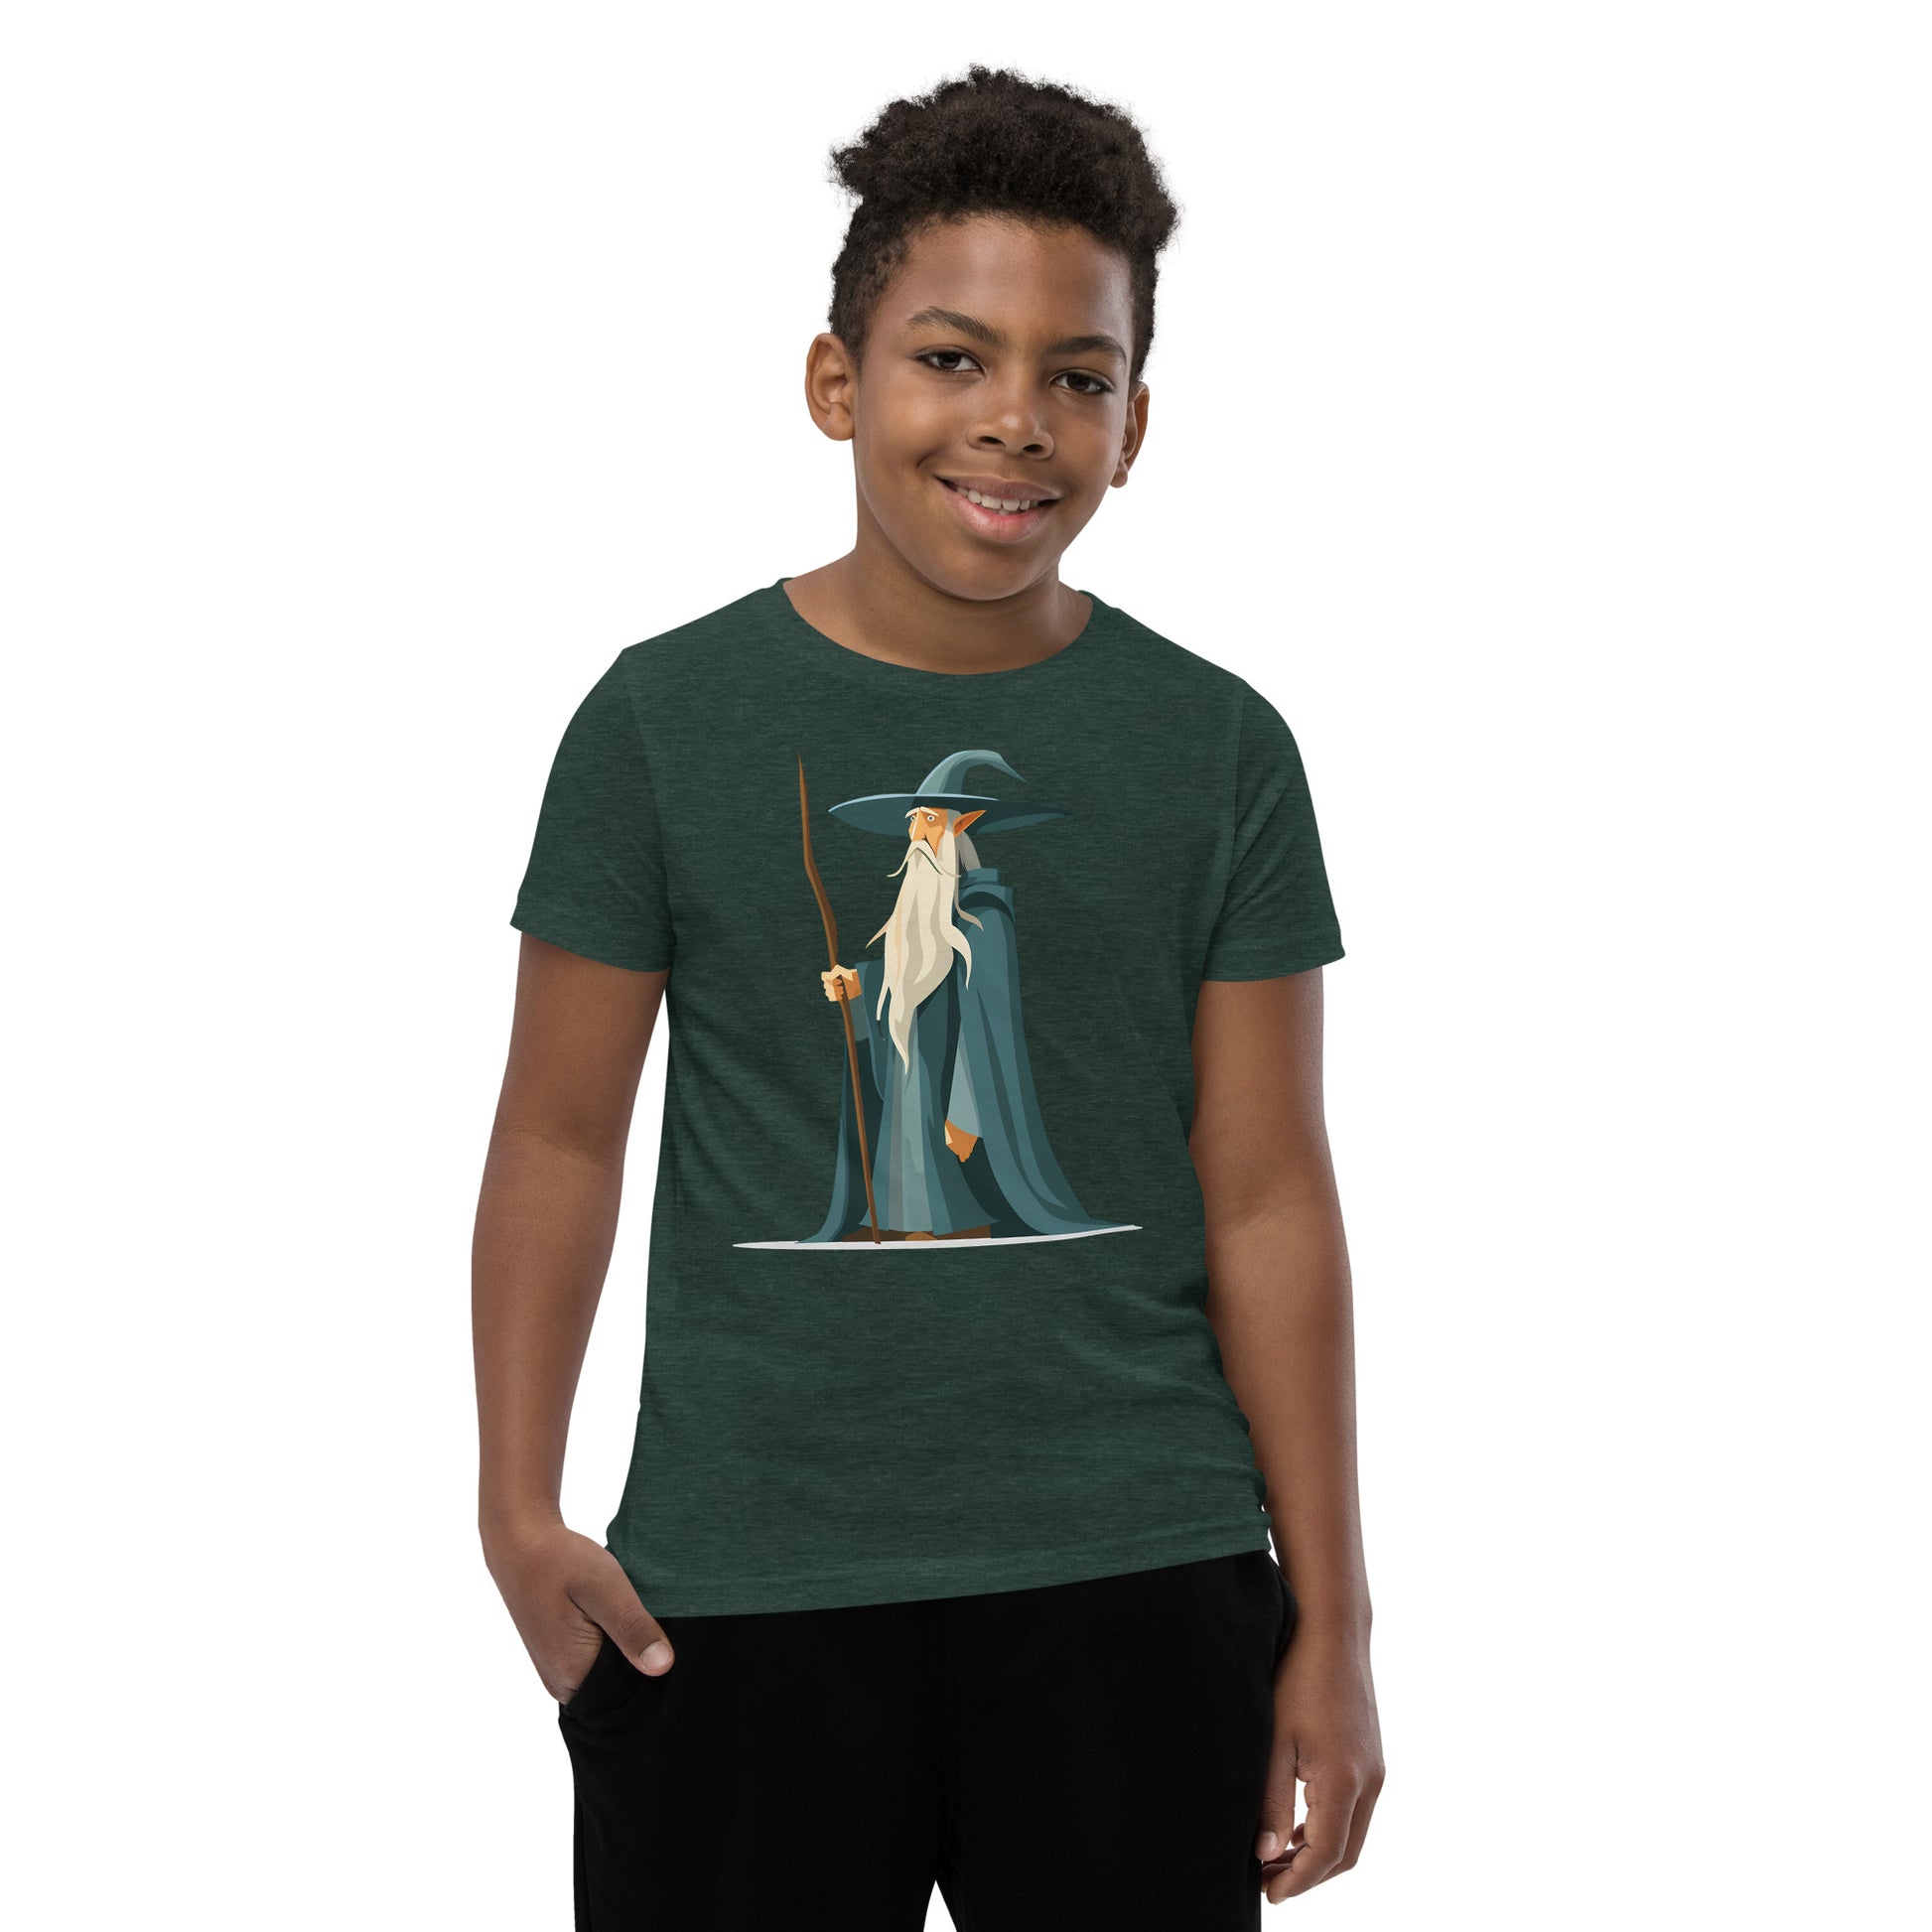 Boy with a green T-shirt with a picture of a magician